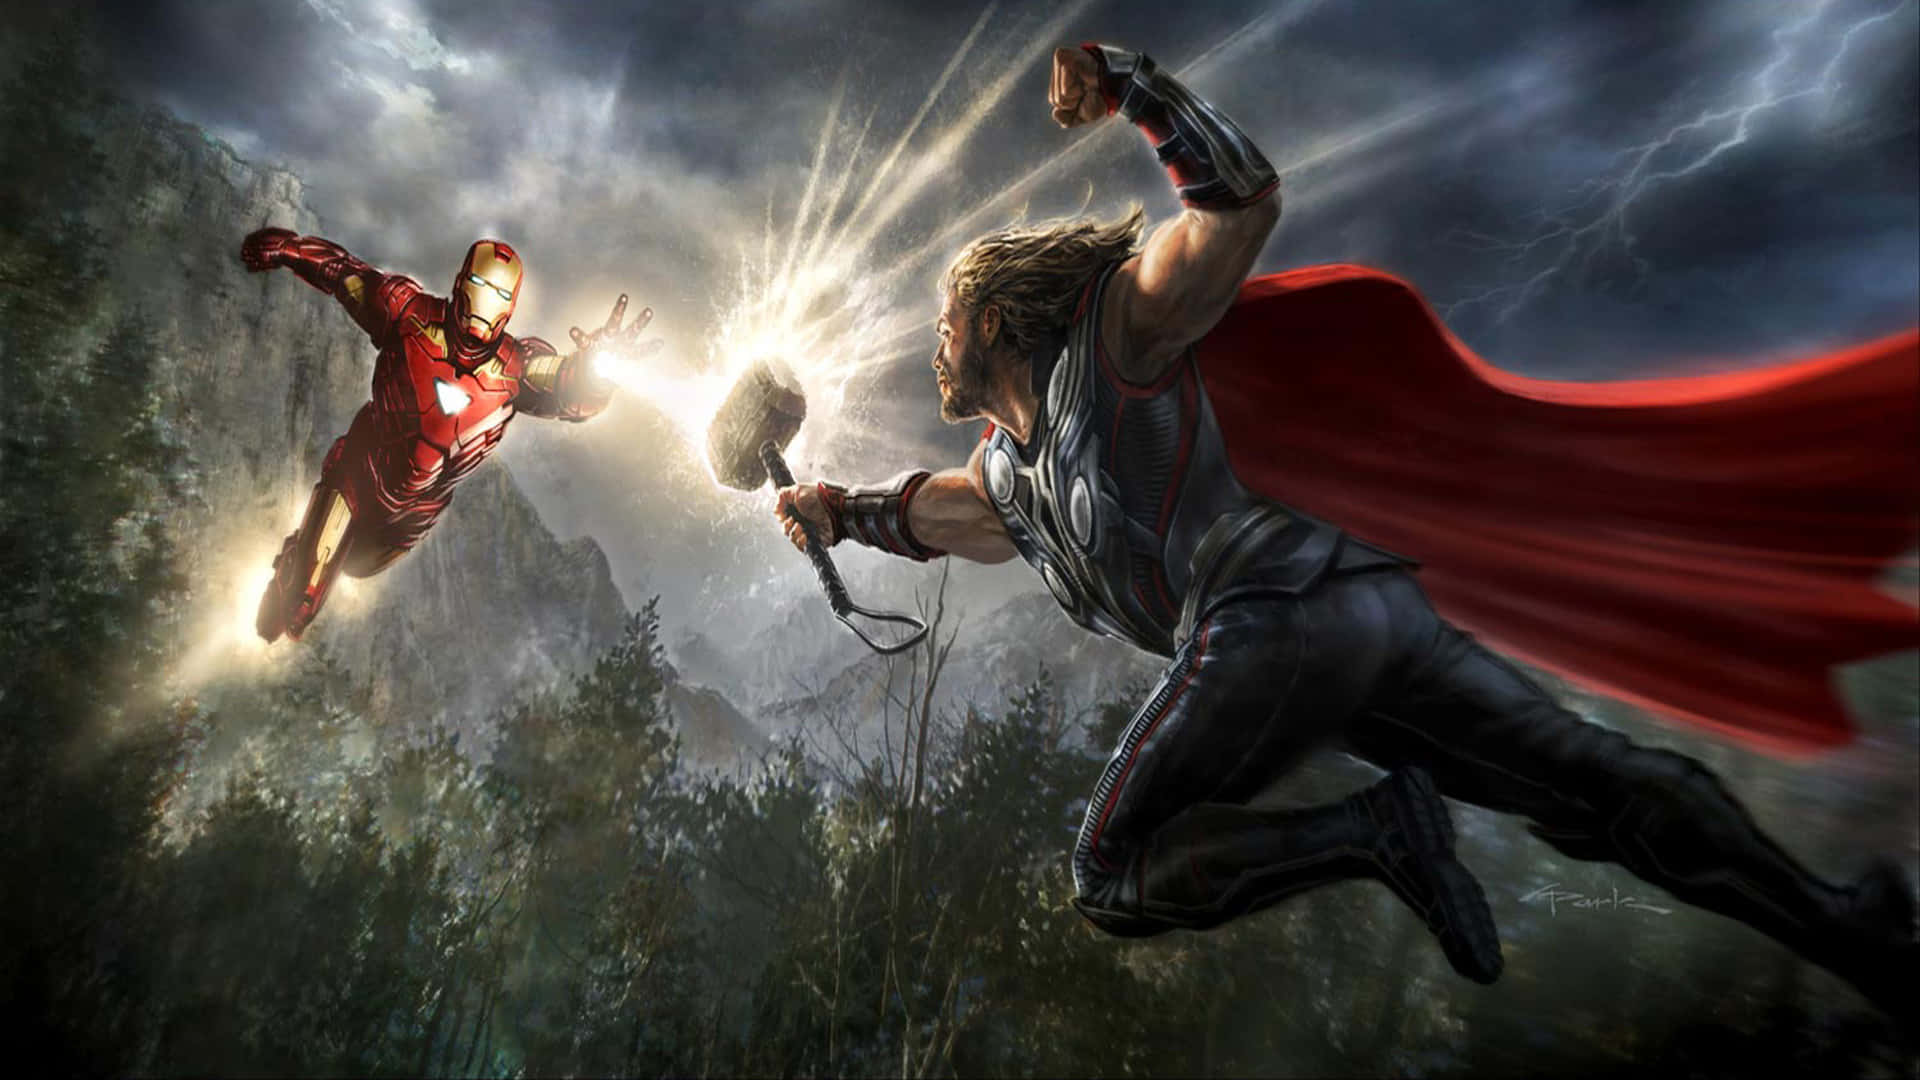 Iron Man and Thor face off in an epic battle Wallpaper